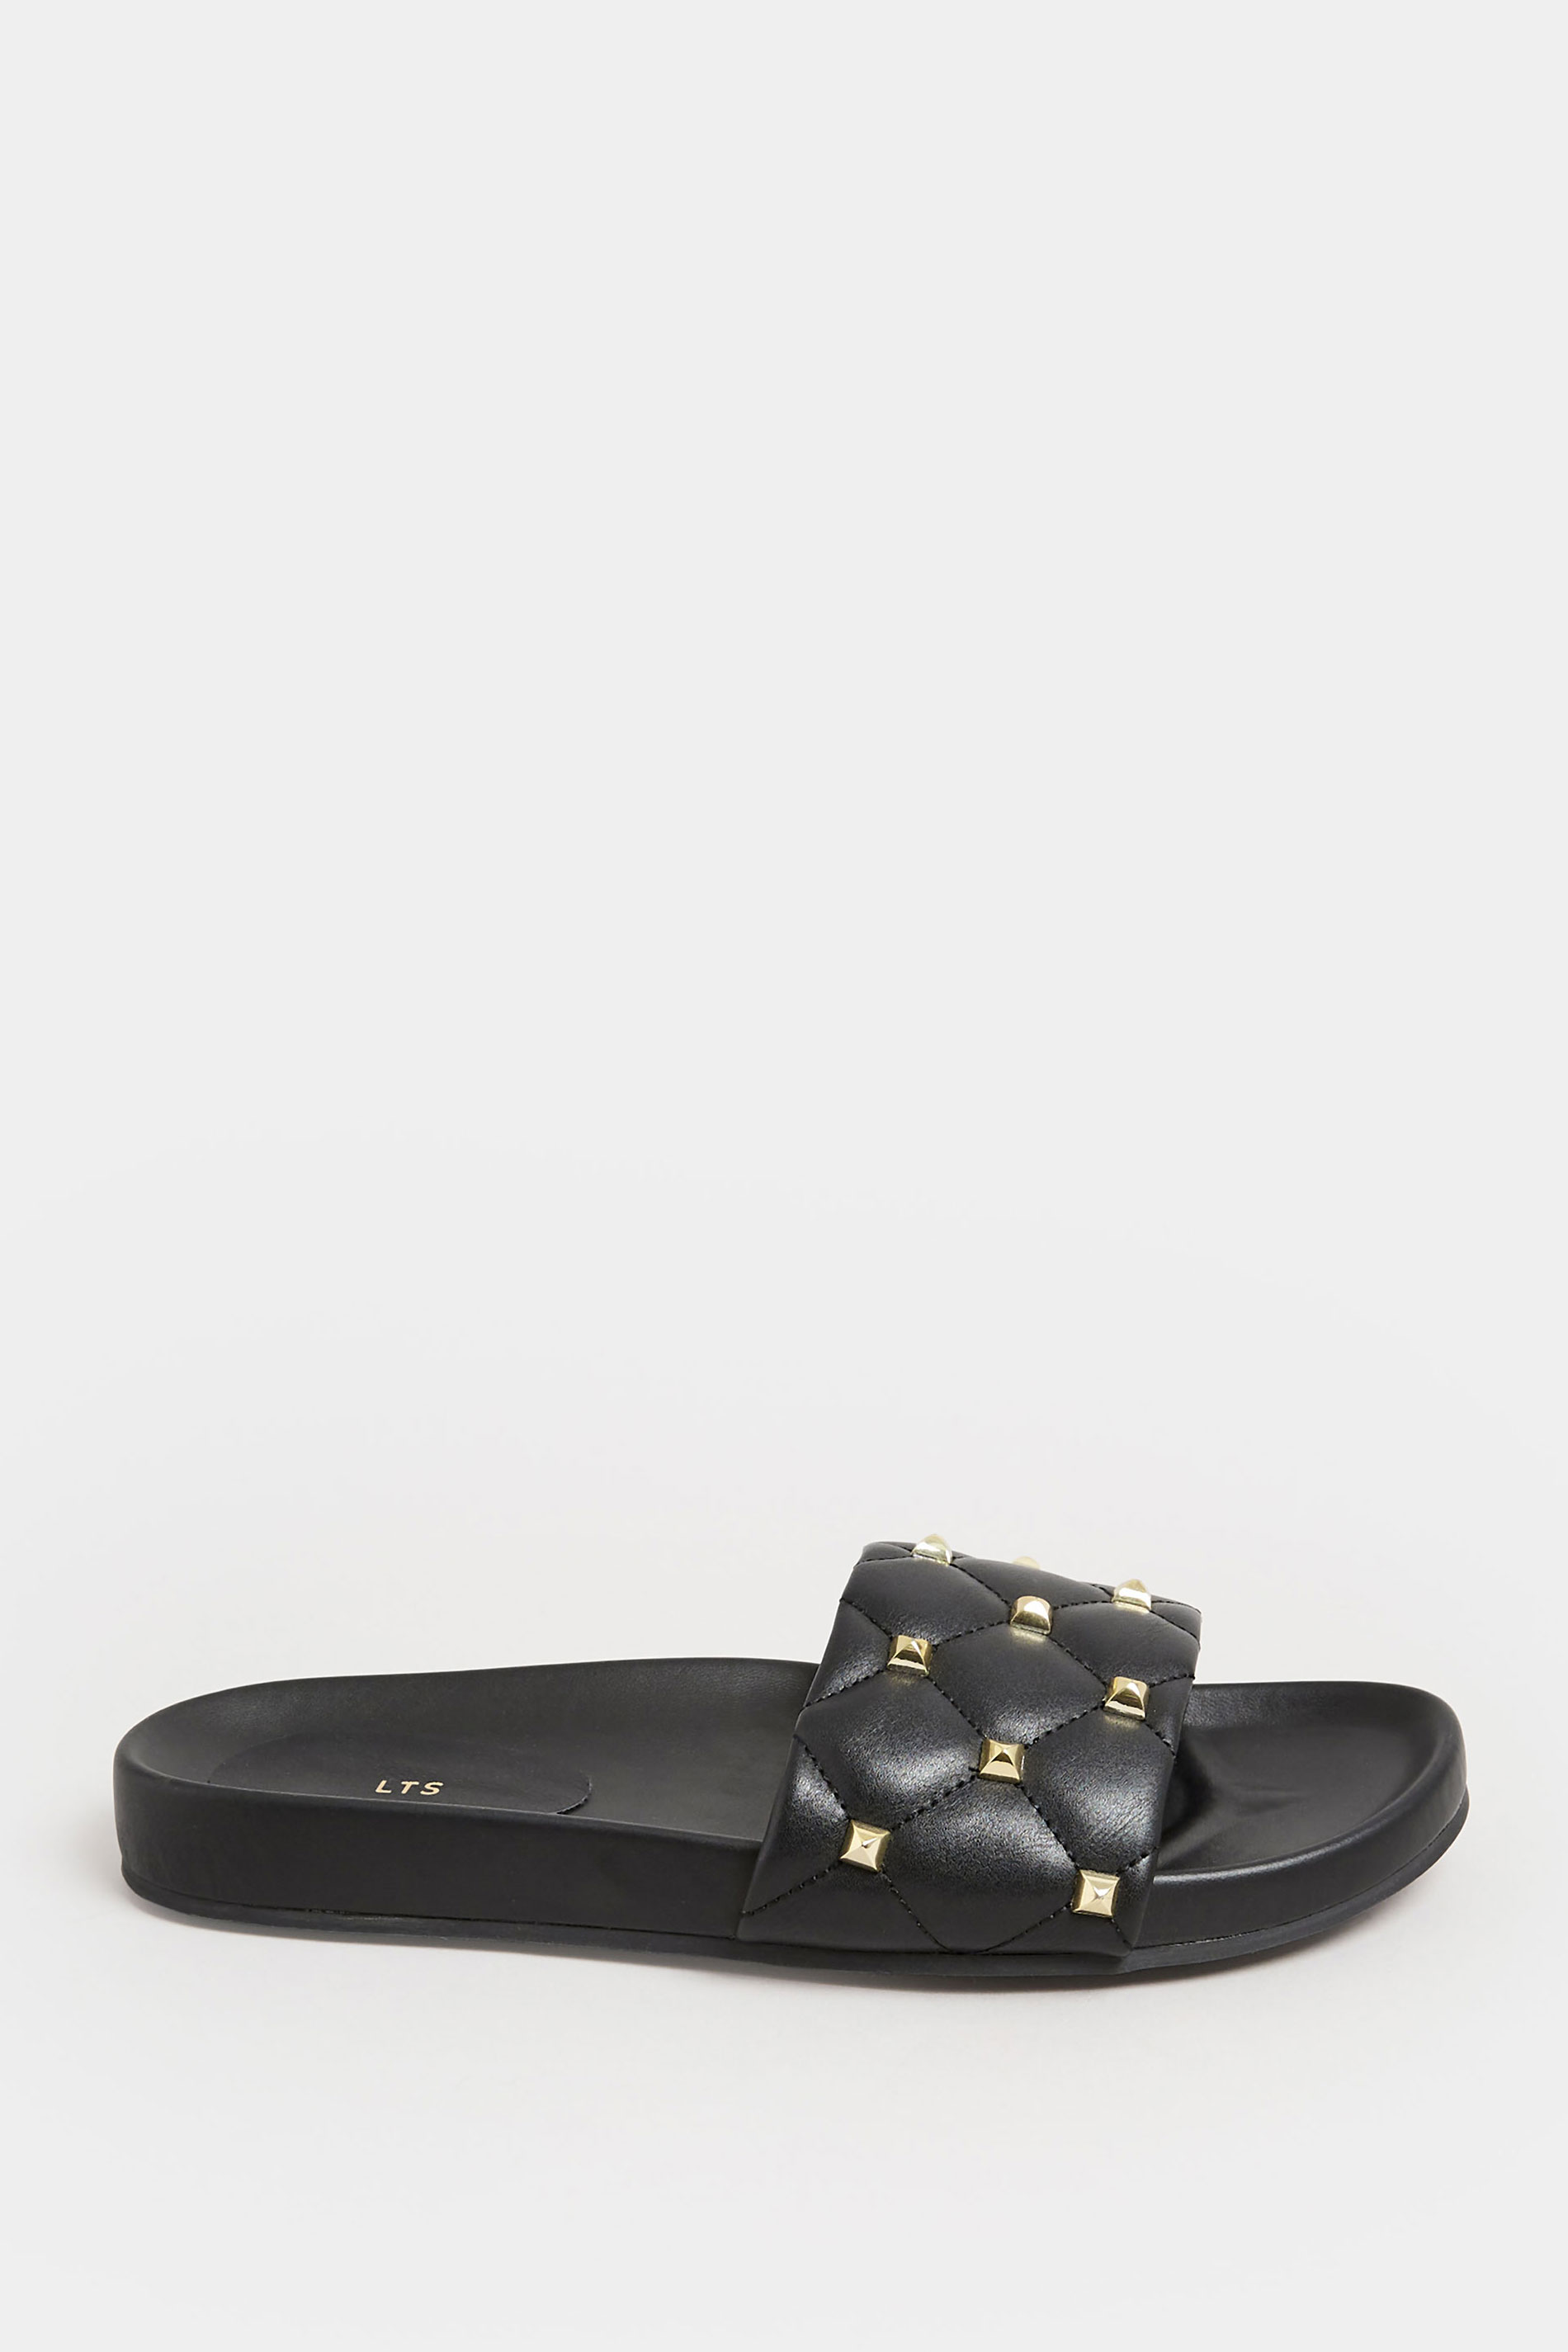 LTS Black Stud Quilted Sliders In Standard Fit